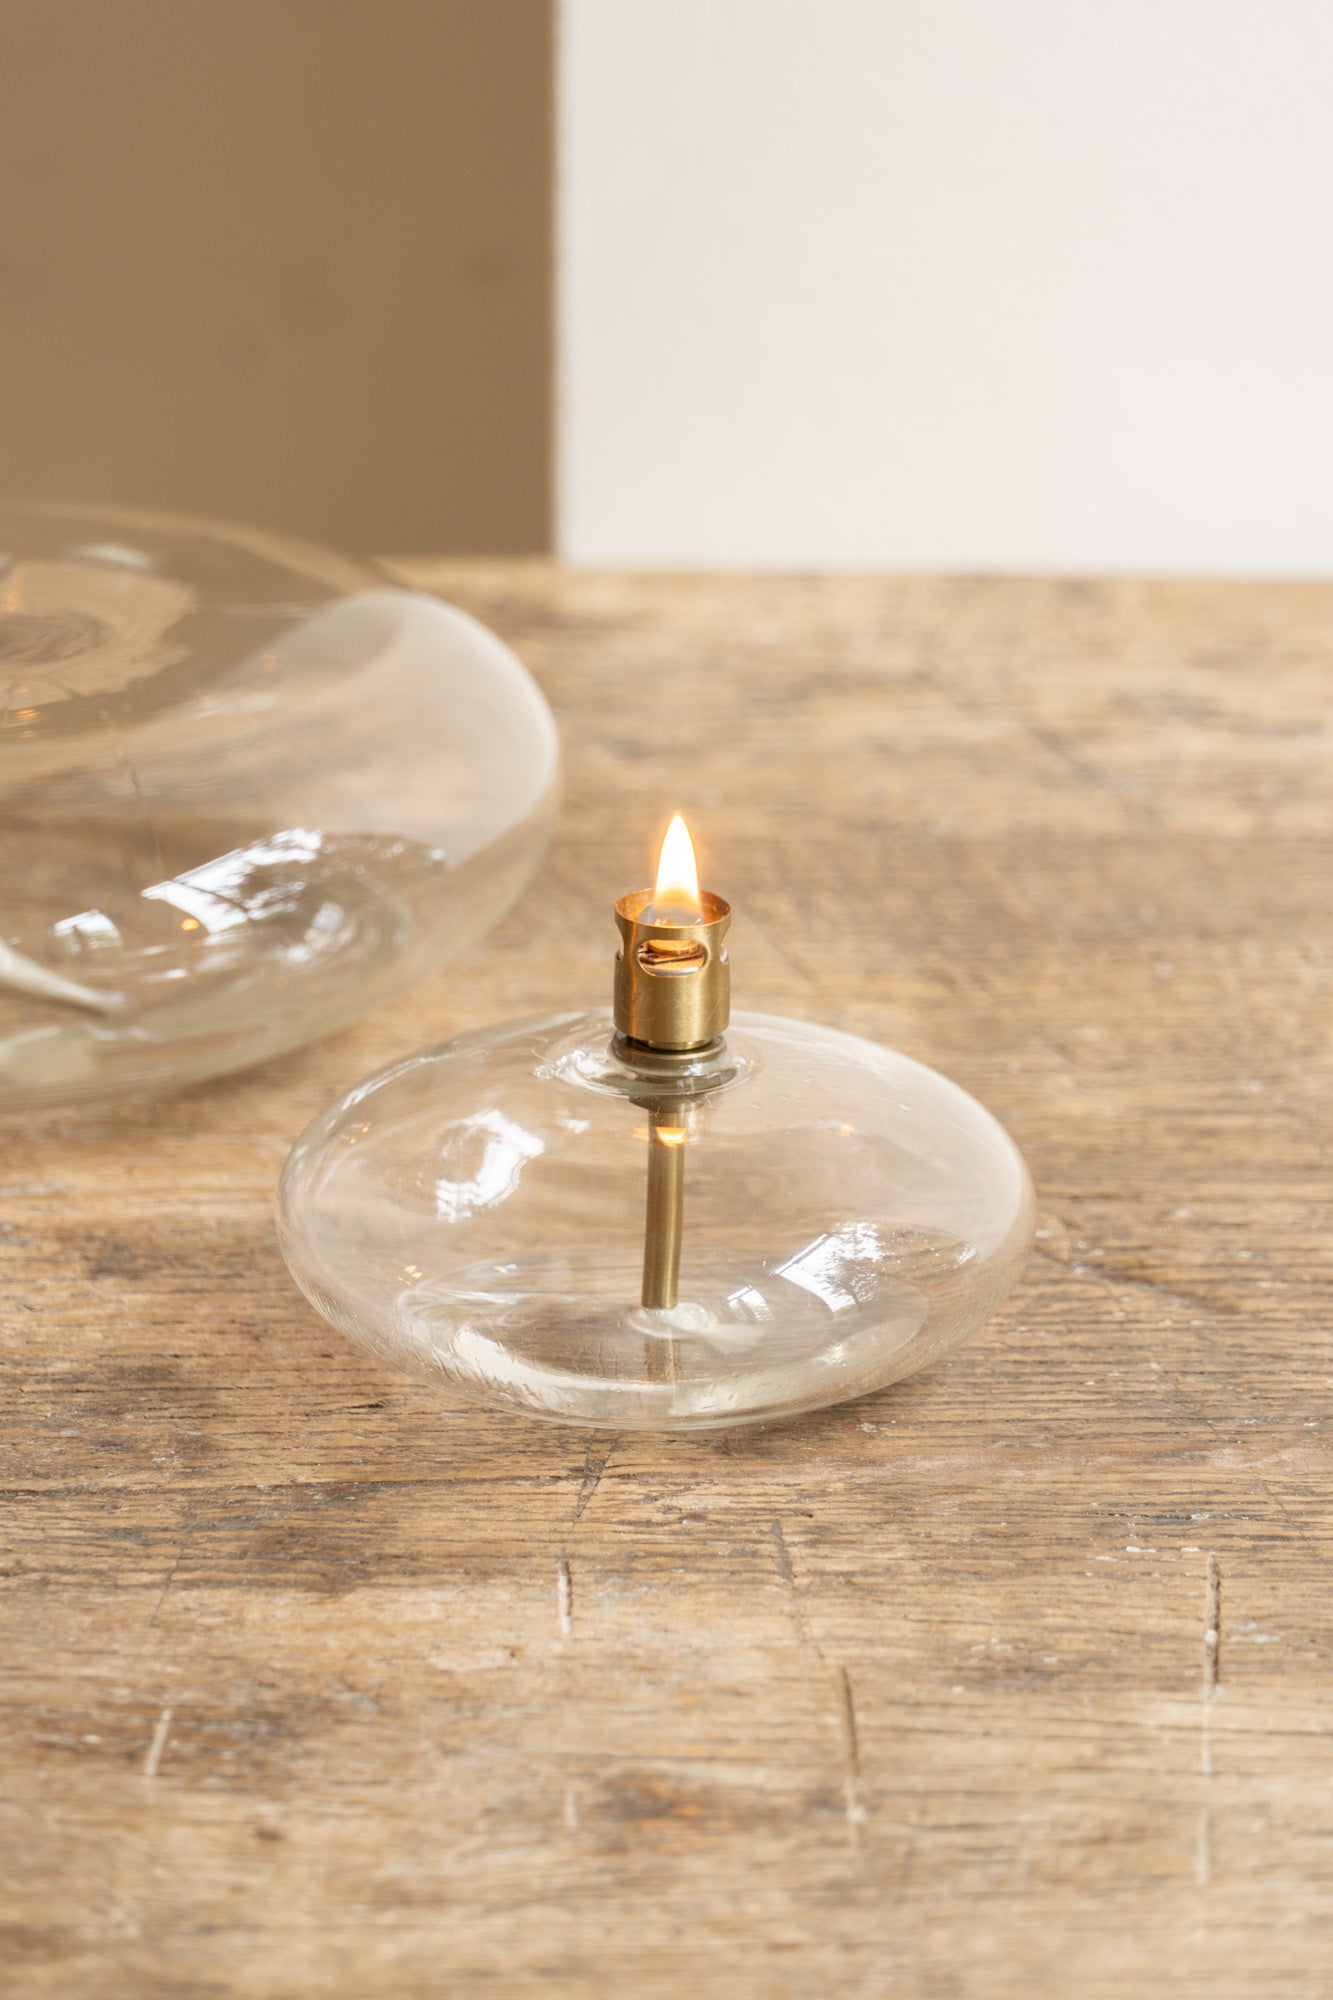 Tips and Tricks for Using Oil Lamps